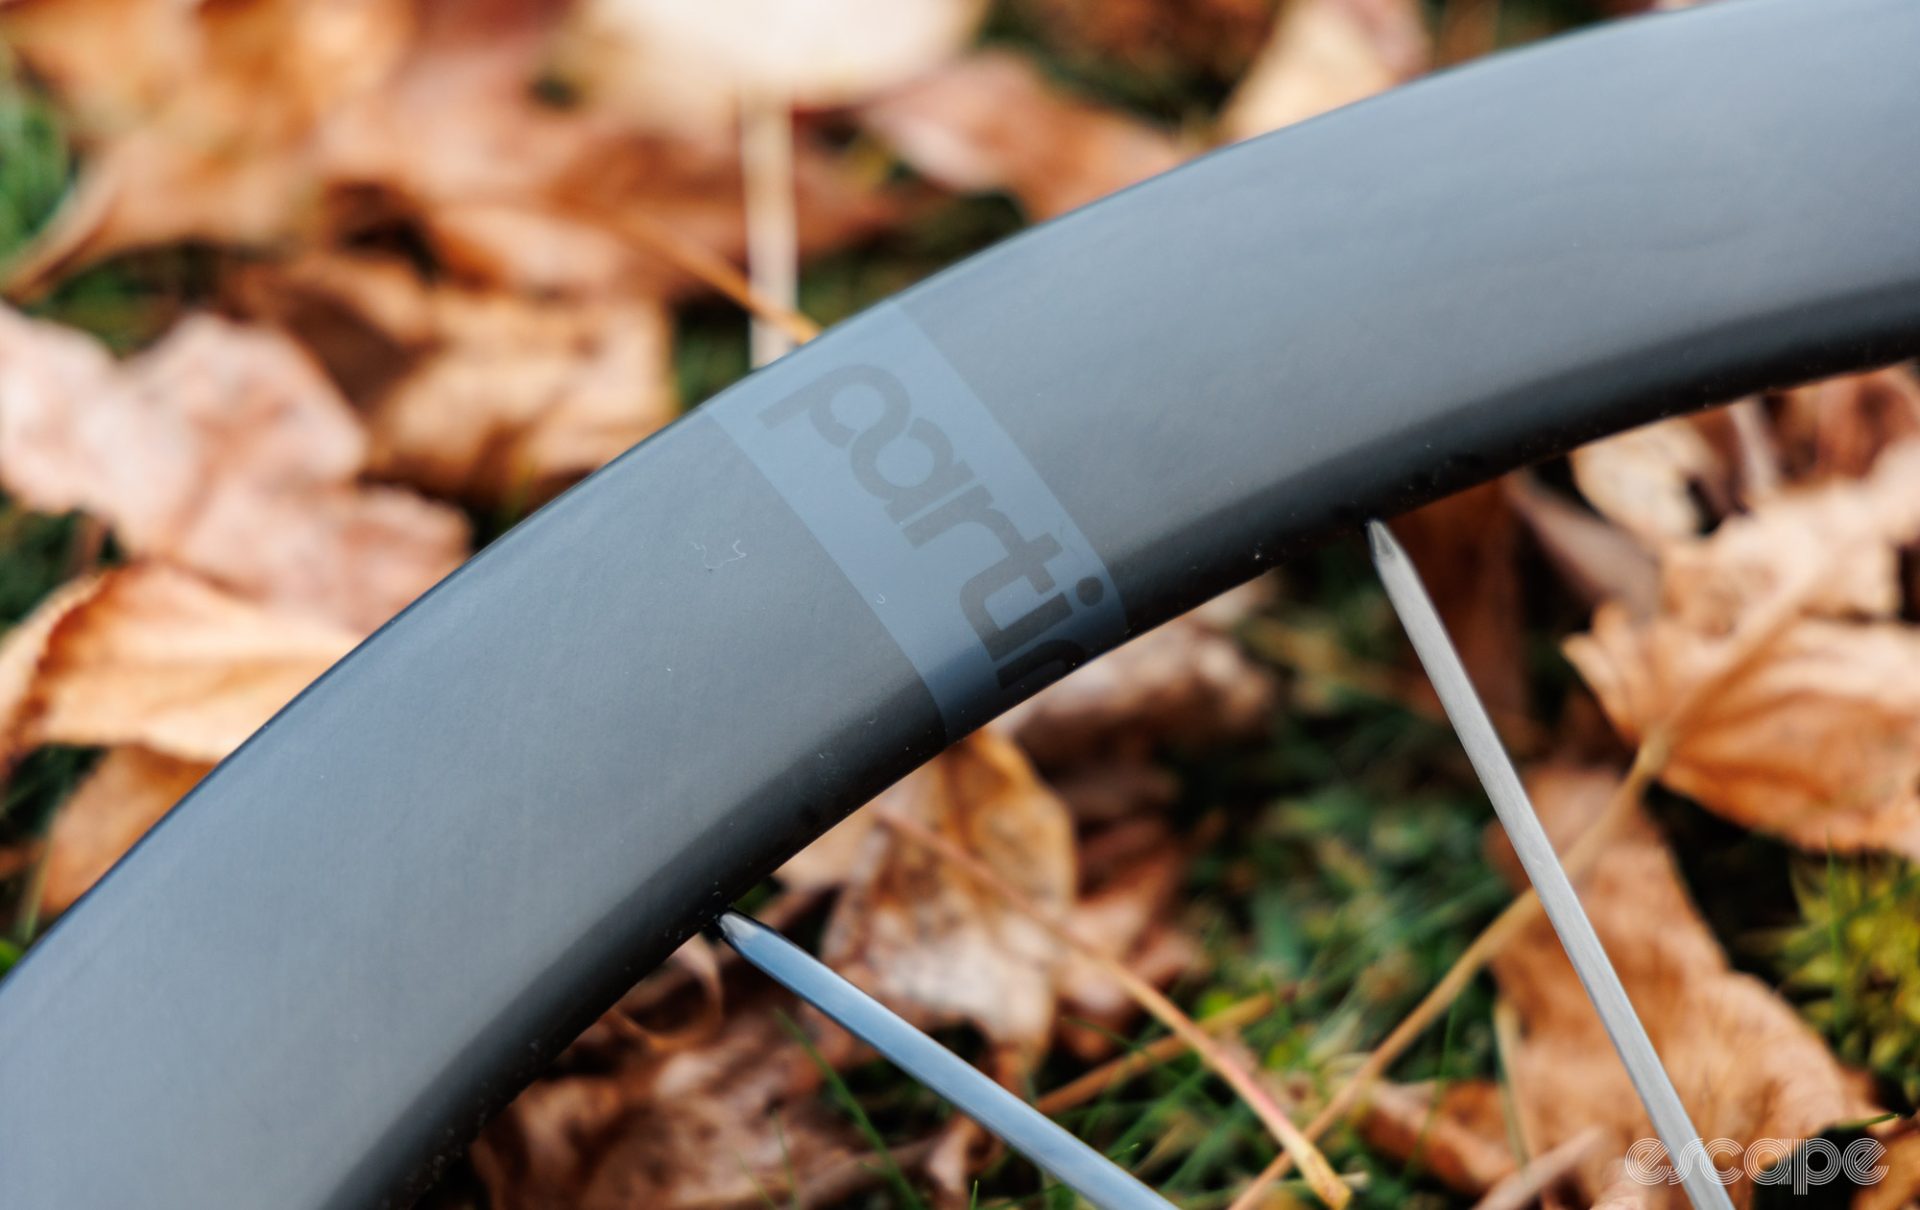 The rim on the Partington MKII is painted a matte black that is thin enough to still let some of the carbon weave texture underneath show through. A subtle charcoal grey and black decal is the only branding.